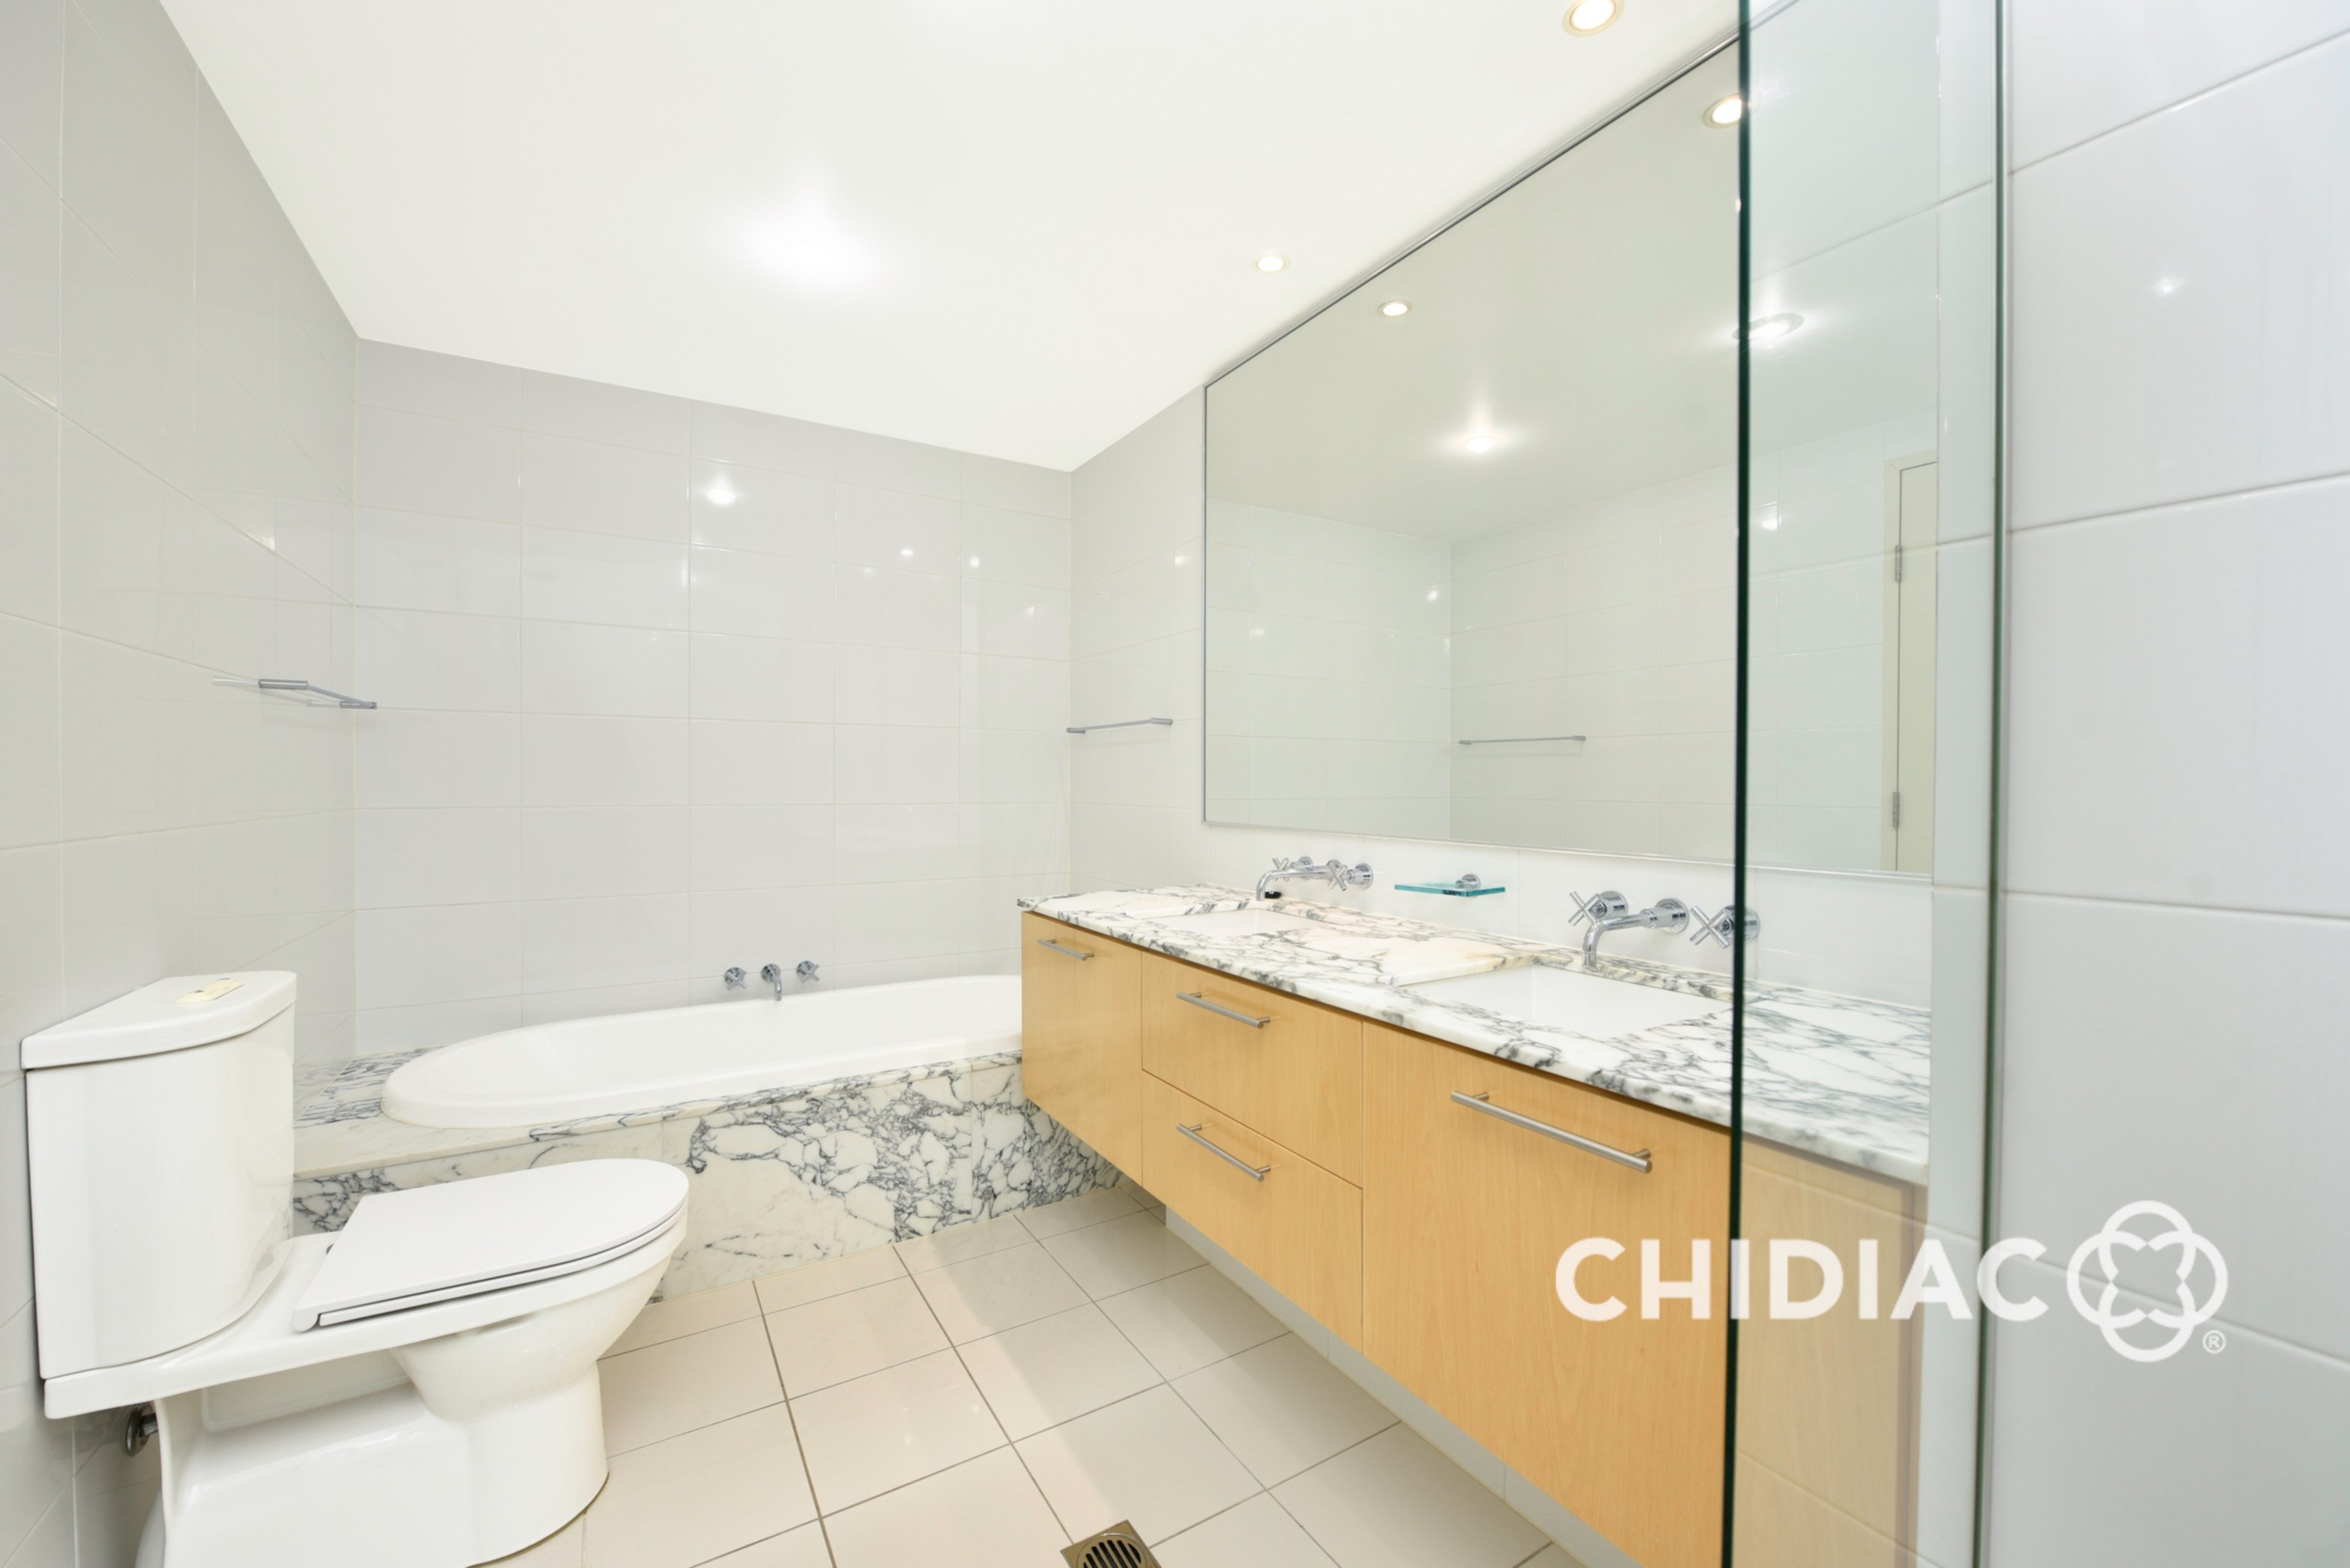 60/1 Bayside Terrace, Cabarita Leased by Chidiac Realty - image 6